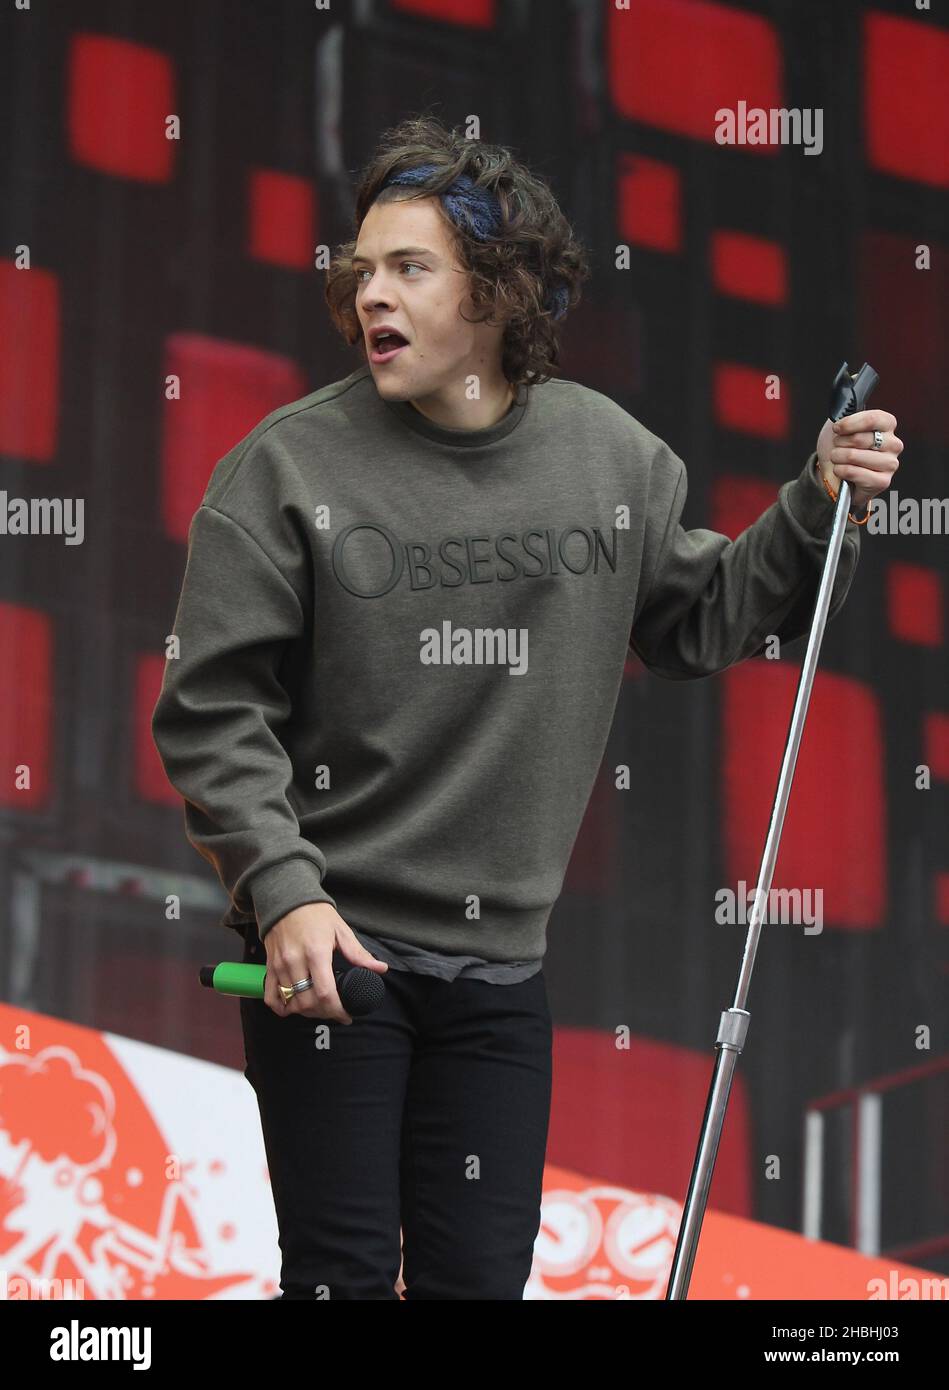 Harry Styles of One Direction performs on stage during the BBC Radio 1 Big  Weekend Festival in Glasgow, Scotland Stock Photo - Alamy